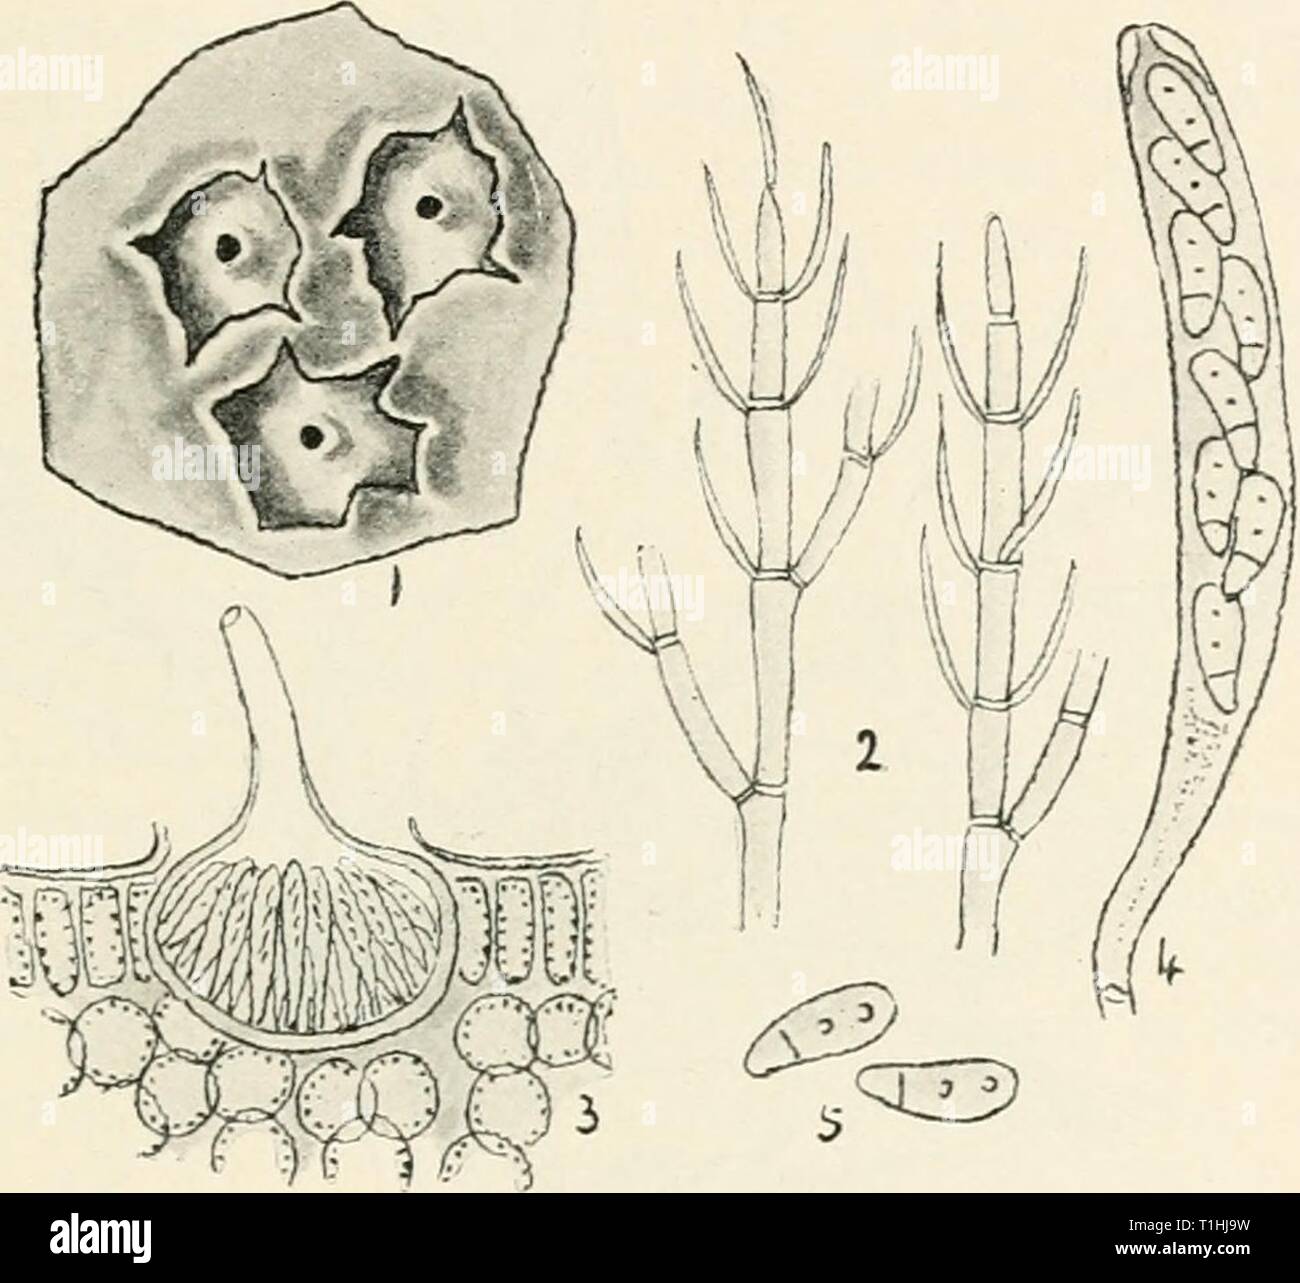 Diseases of cultivated plants and Diseases of cultivated plants and trees  diseasesofcultiv00massuoft Year: [1910?]  GNOMONIA 20I phore, 14-20X1-1-5 /t. Perithecia of ascigerous form with an ostiolum or beak projecting beyond surface of leaf; asci 8-spored; spores liyaline, narrowly ovate, i-septate below the middle, 16-18 X 5-6 /x. Collecting and burning all the hanging leaves during winter is the only practical method of stamping out the disease. This practice, however, should be general in an infected district, otherwise it is of little avail, as the spores are blown    Fig. 55.—Gnomonia er Stock Photo